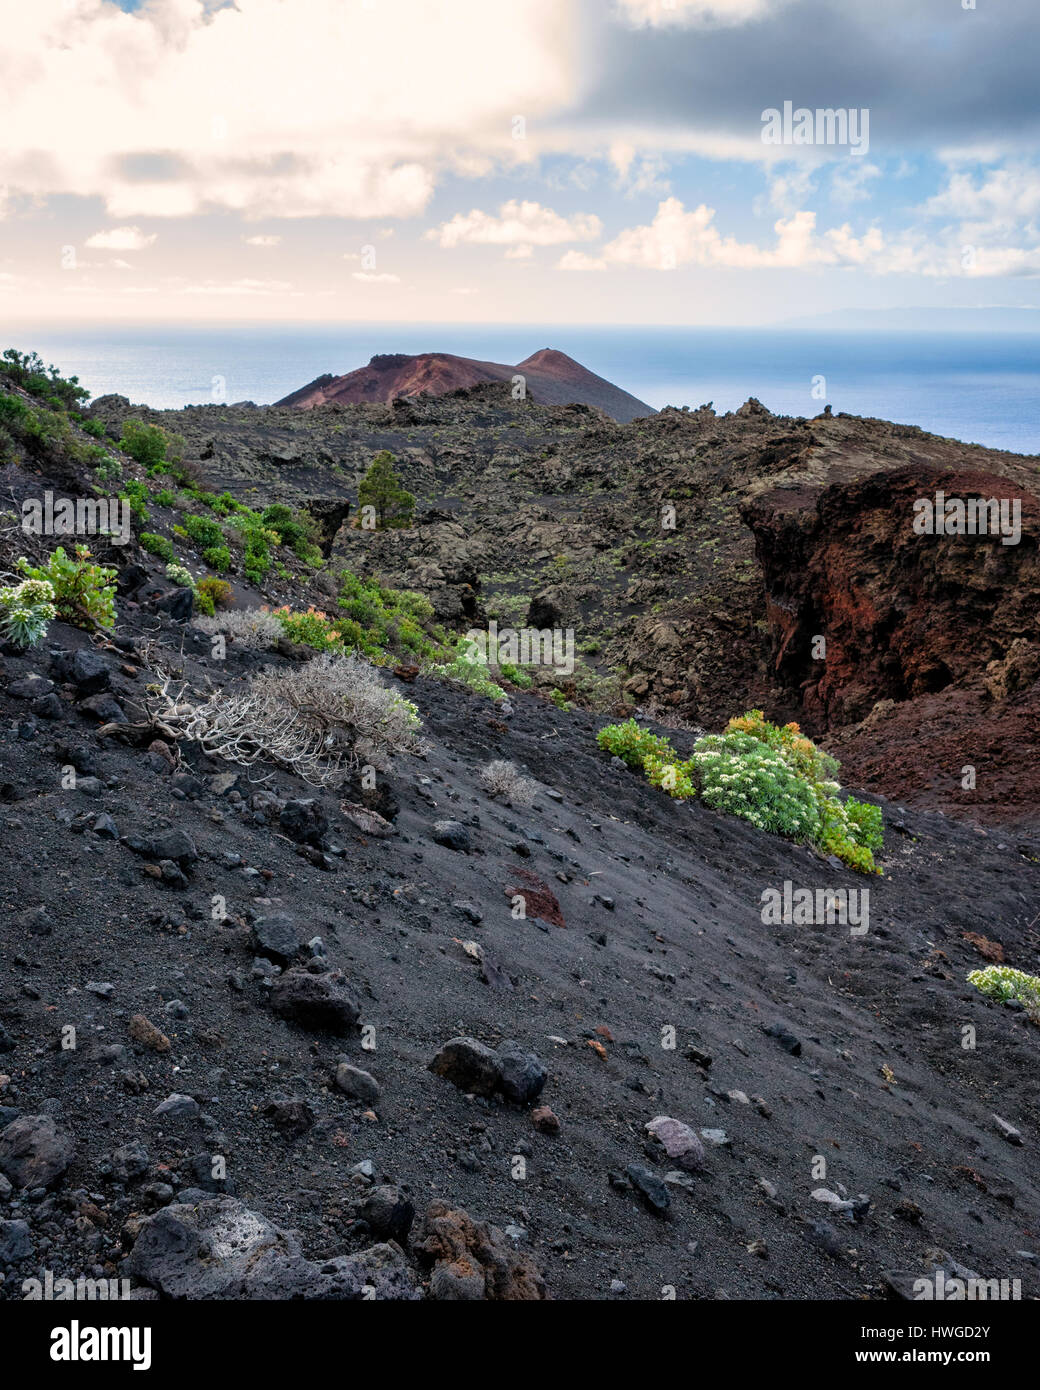 Cumbre Vieja, Fuencaliente. La Palma.  A view along the volcano's winding ridge and geological land formation. Very little vegetation except for Echium Brevirame growing in the lava rock of Cumbre Vieja region.  It's a bright day with fast moving clouds. Stock Photo